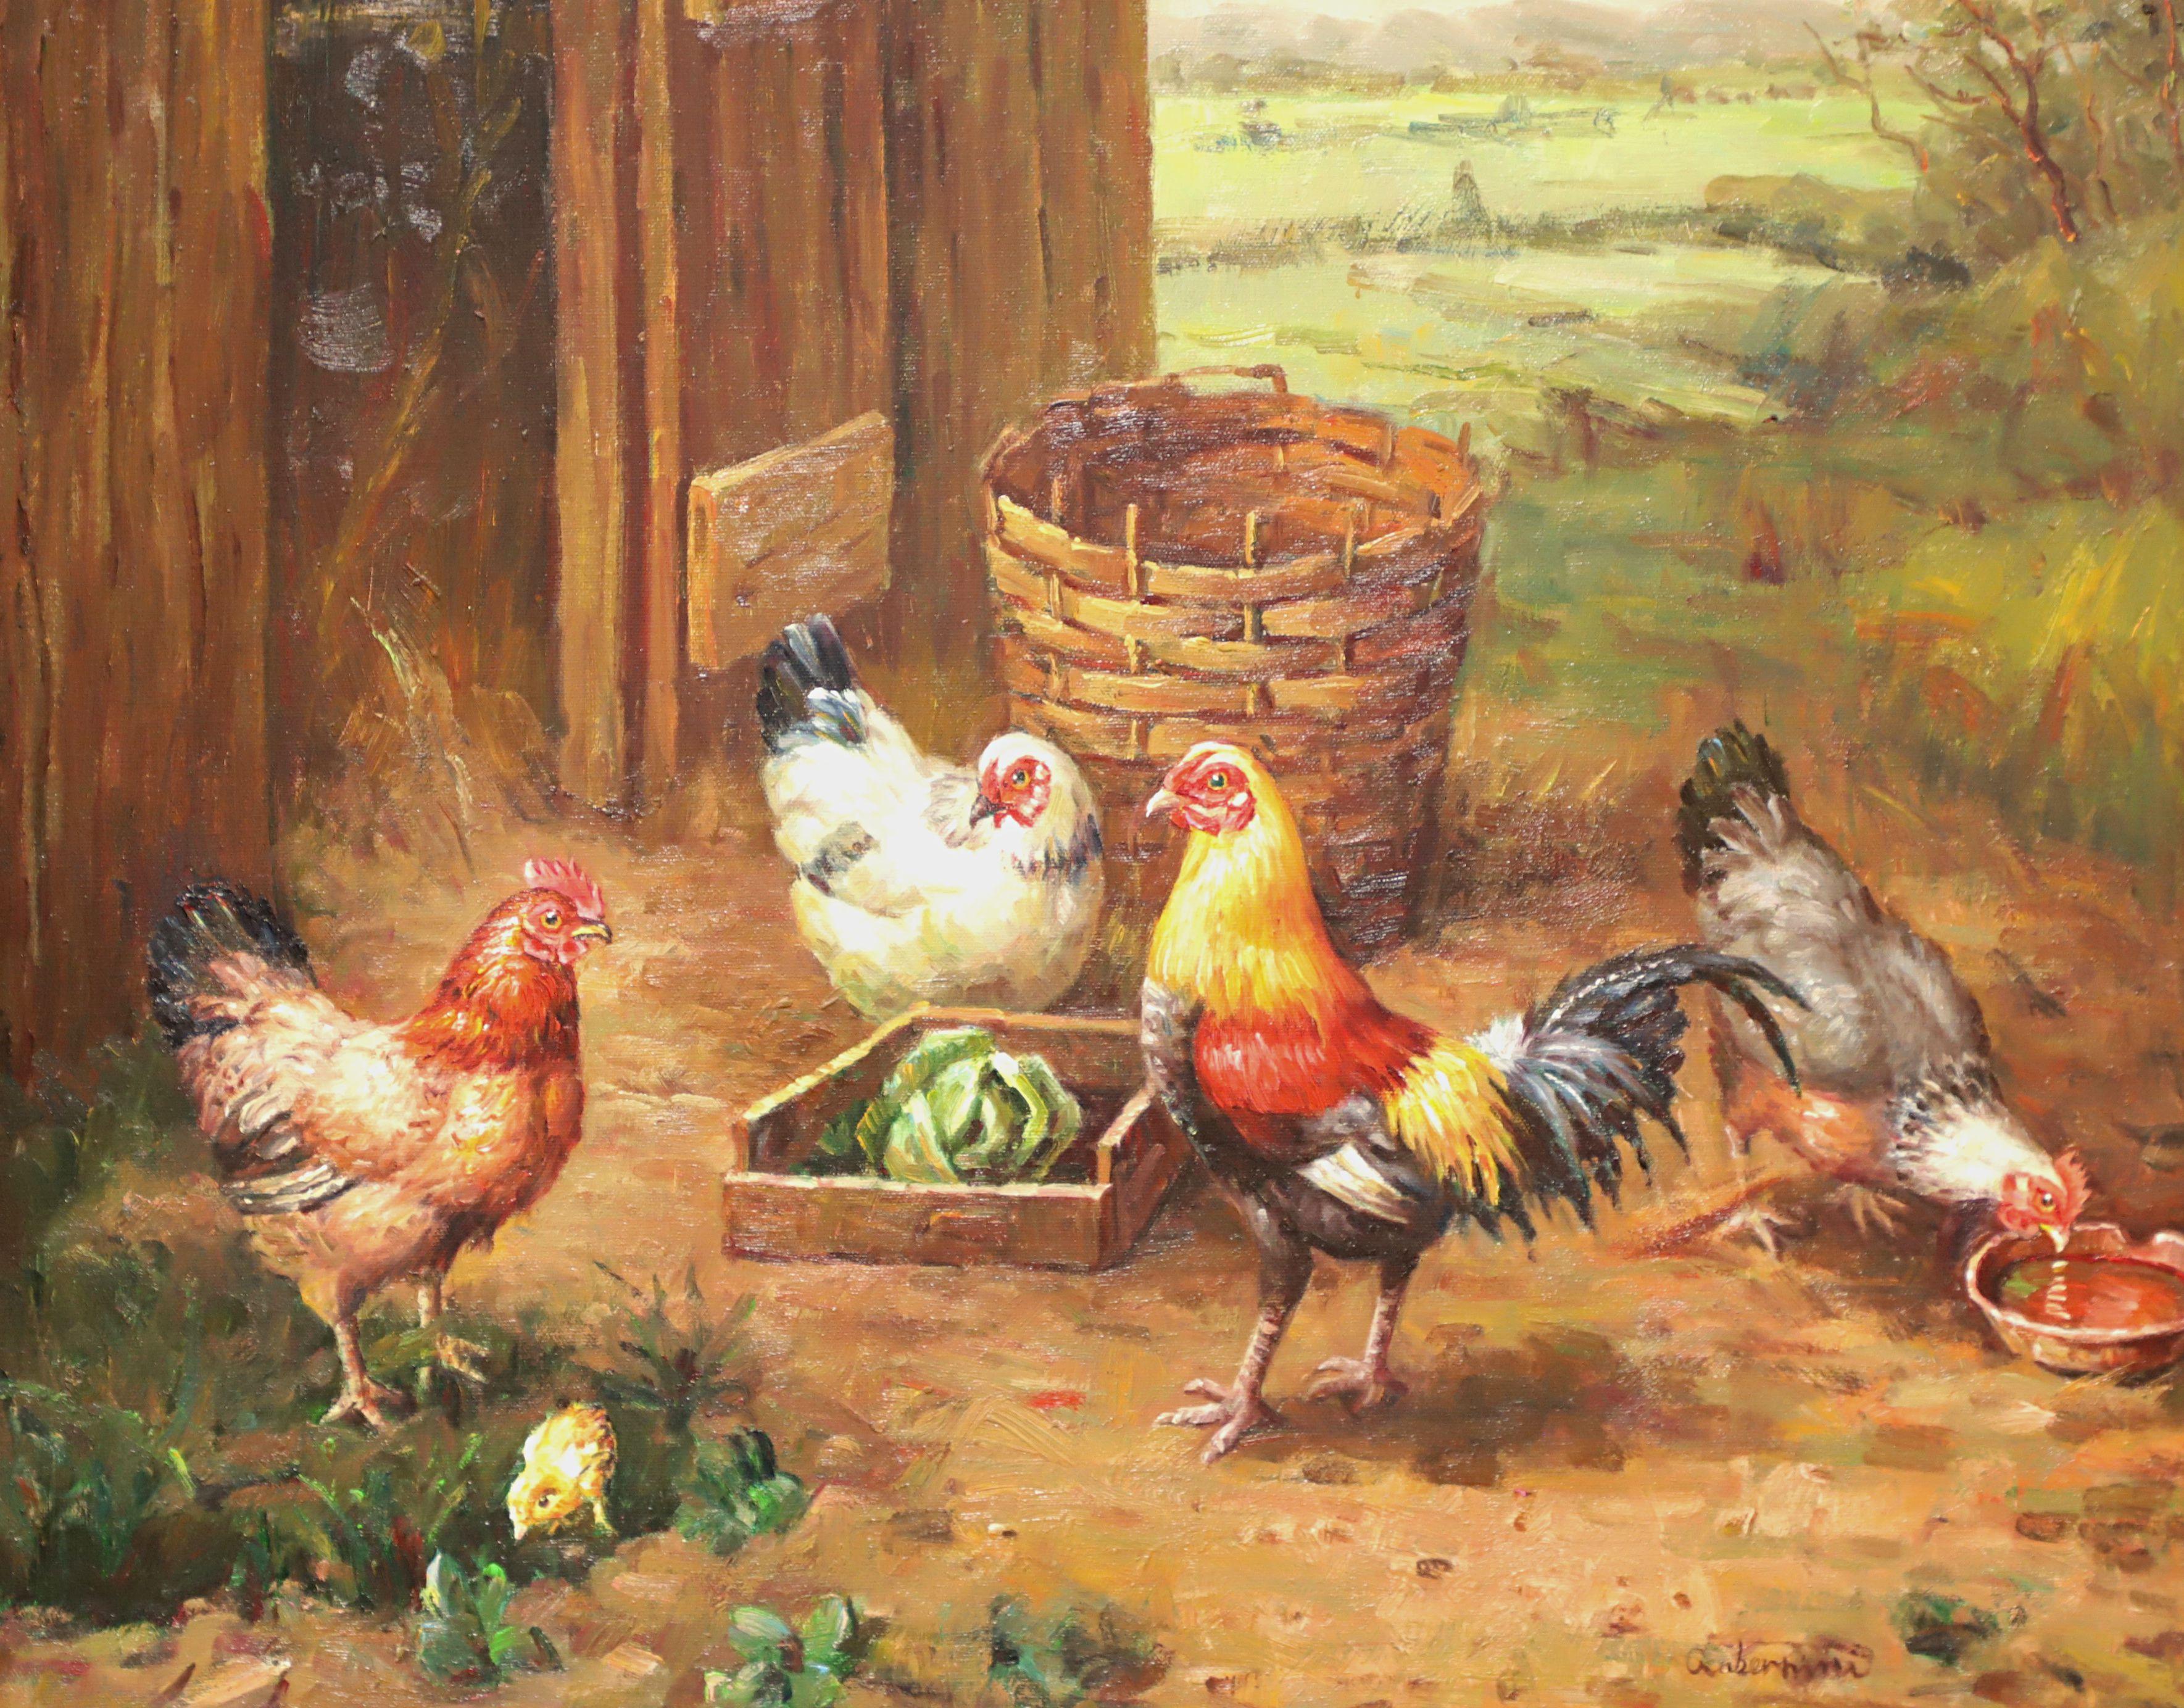 An original oil painting on canvas, from the 20th Century. Untitled, (Chicken Scene). Signed, signature is illegible, to lower right. Presented in a white and gold painted wood frame with wire hanger.

Measures: Overall: 34.5w 3.5d 30.75h, Canvas: